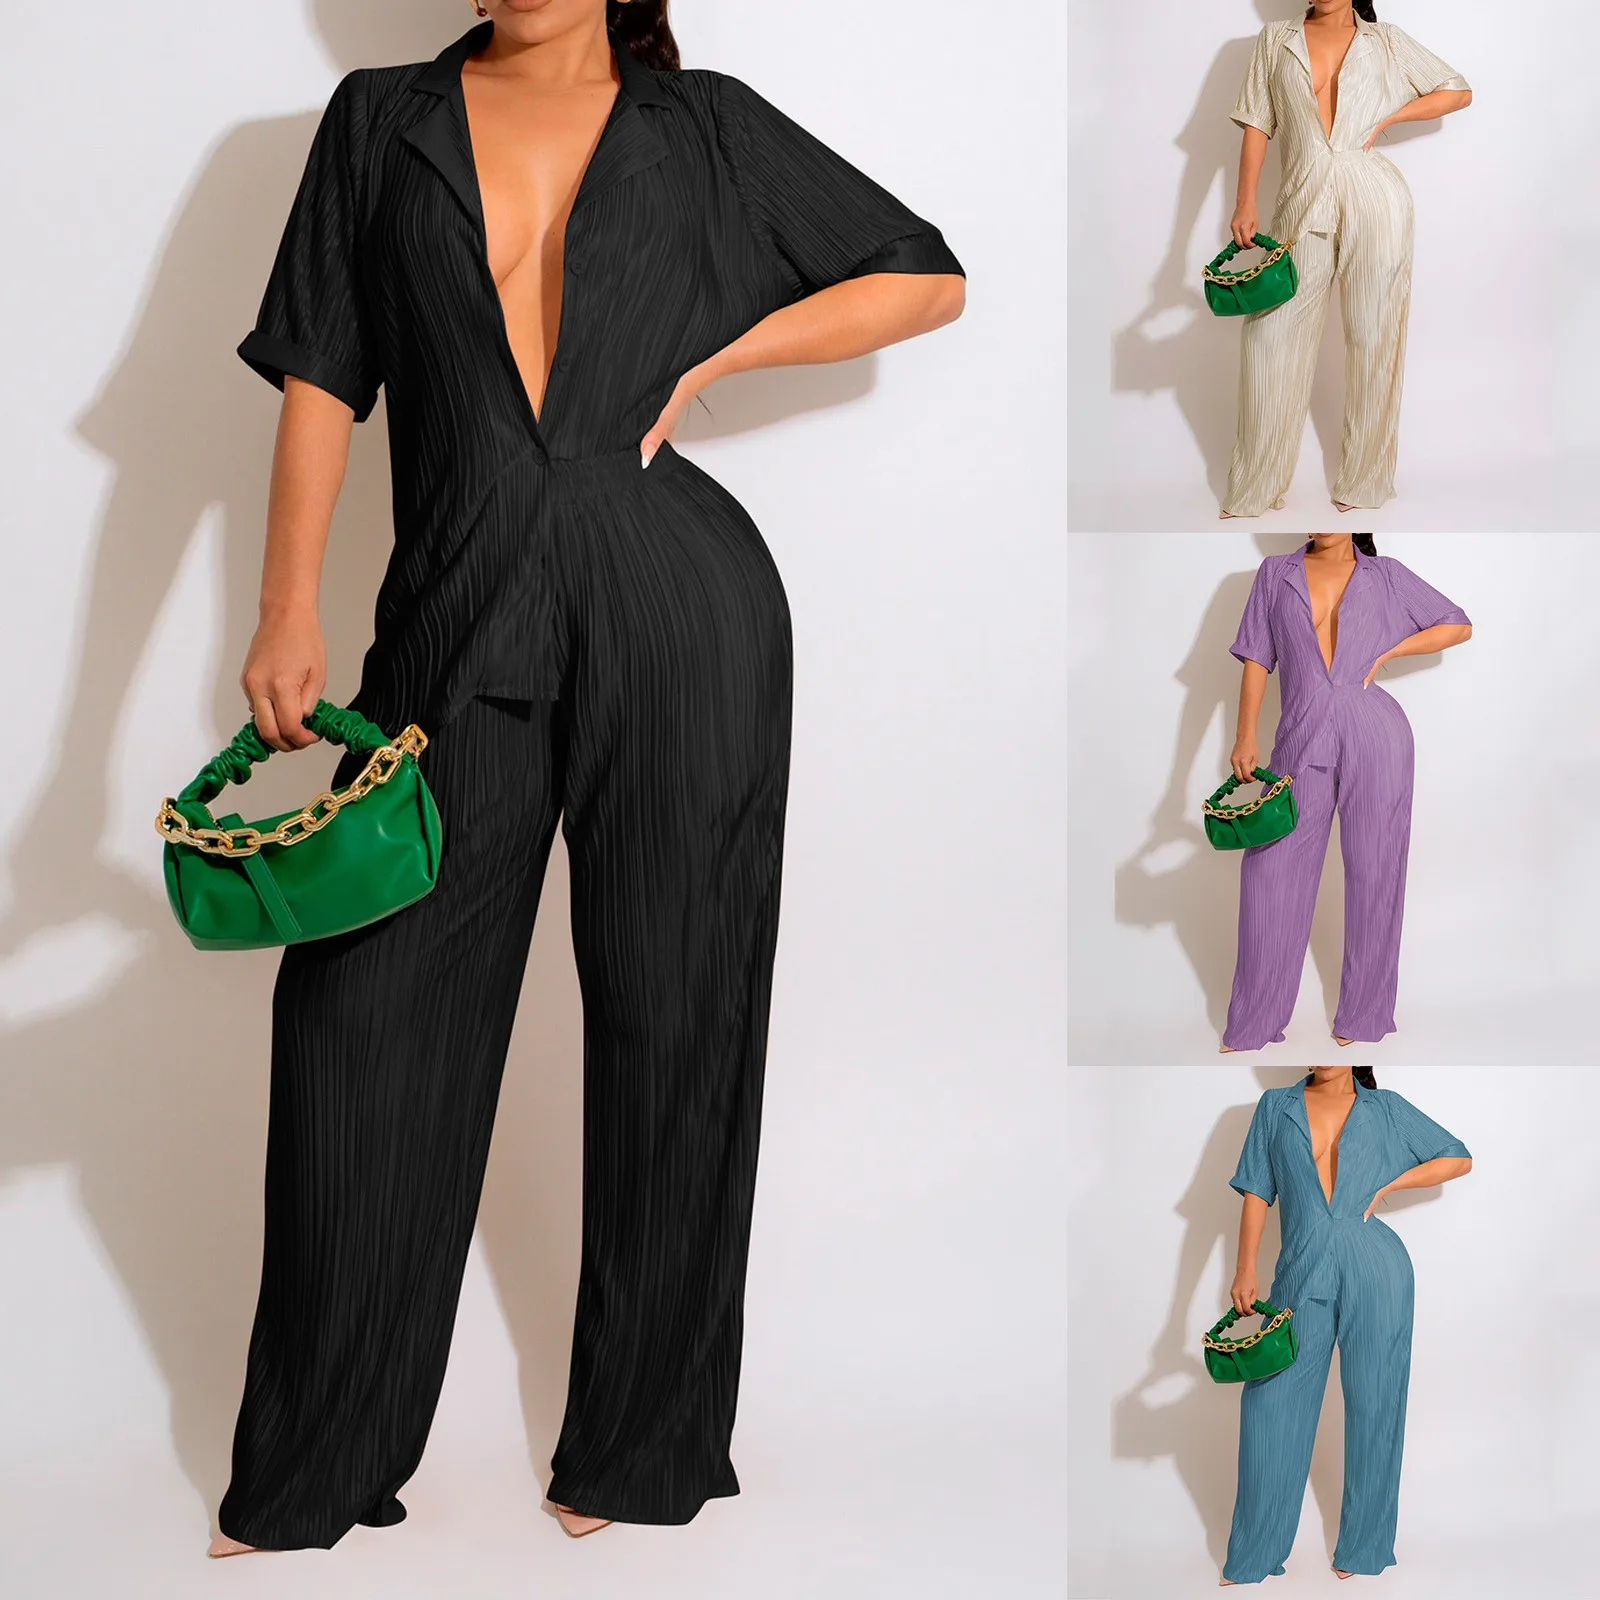 Women's 2 Piece Casual Pleated Outfits Short Sleeve Button Curvy Fit Pants Formal Jumpsuits for Women Elegant Juniors Suits Set